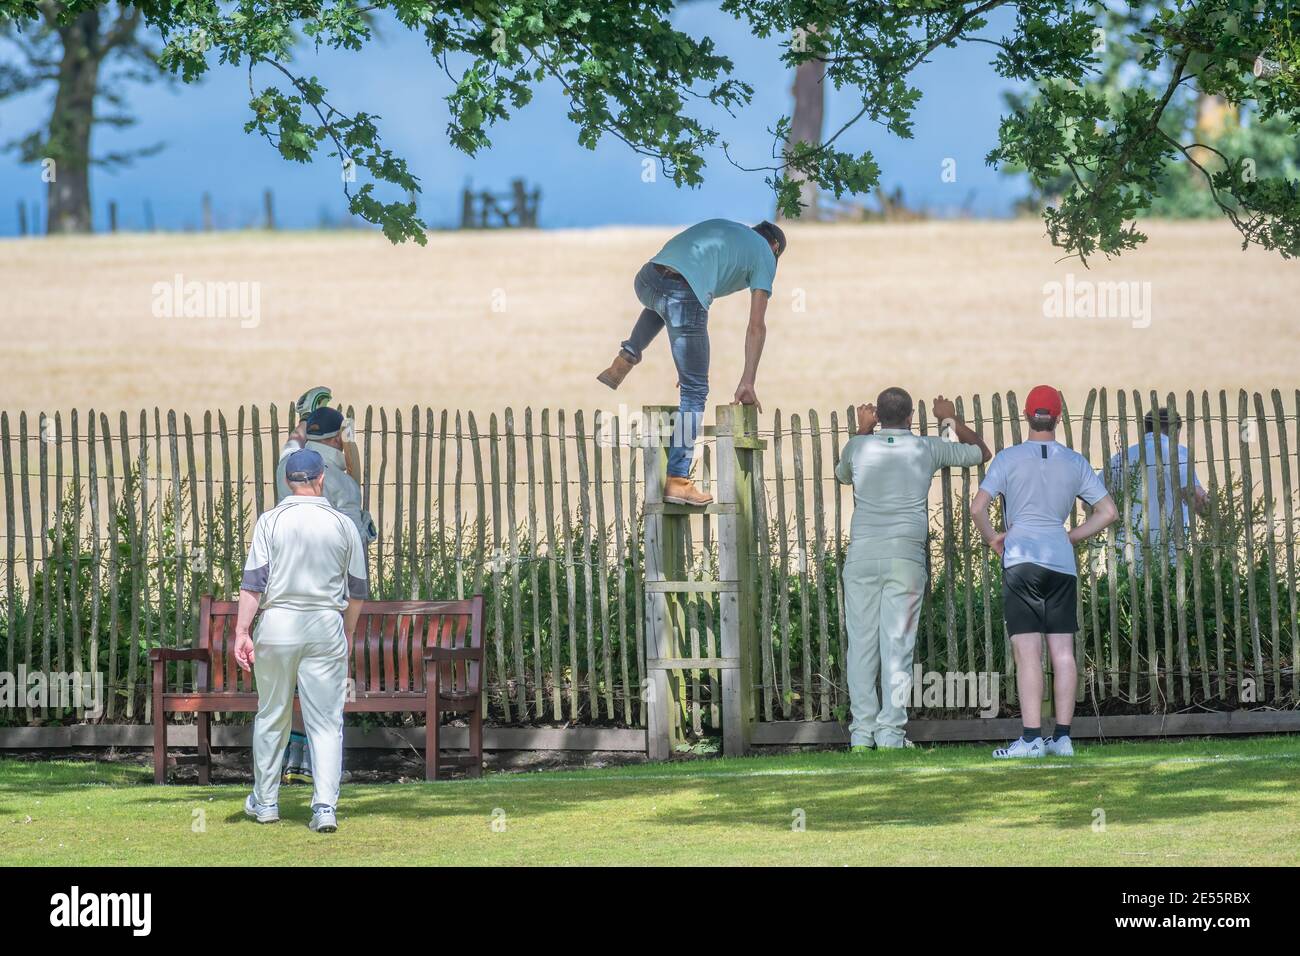 Man climbs over a fence to enter field of straw to retrieve ball at amateur cricket match in Perth, Scotland. Stock Photo